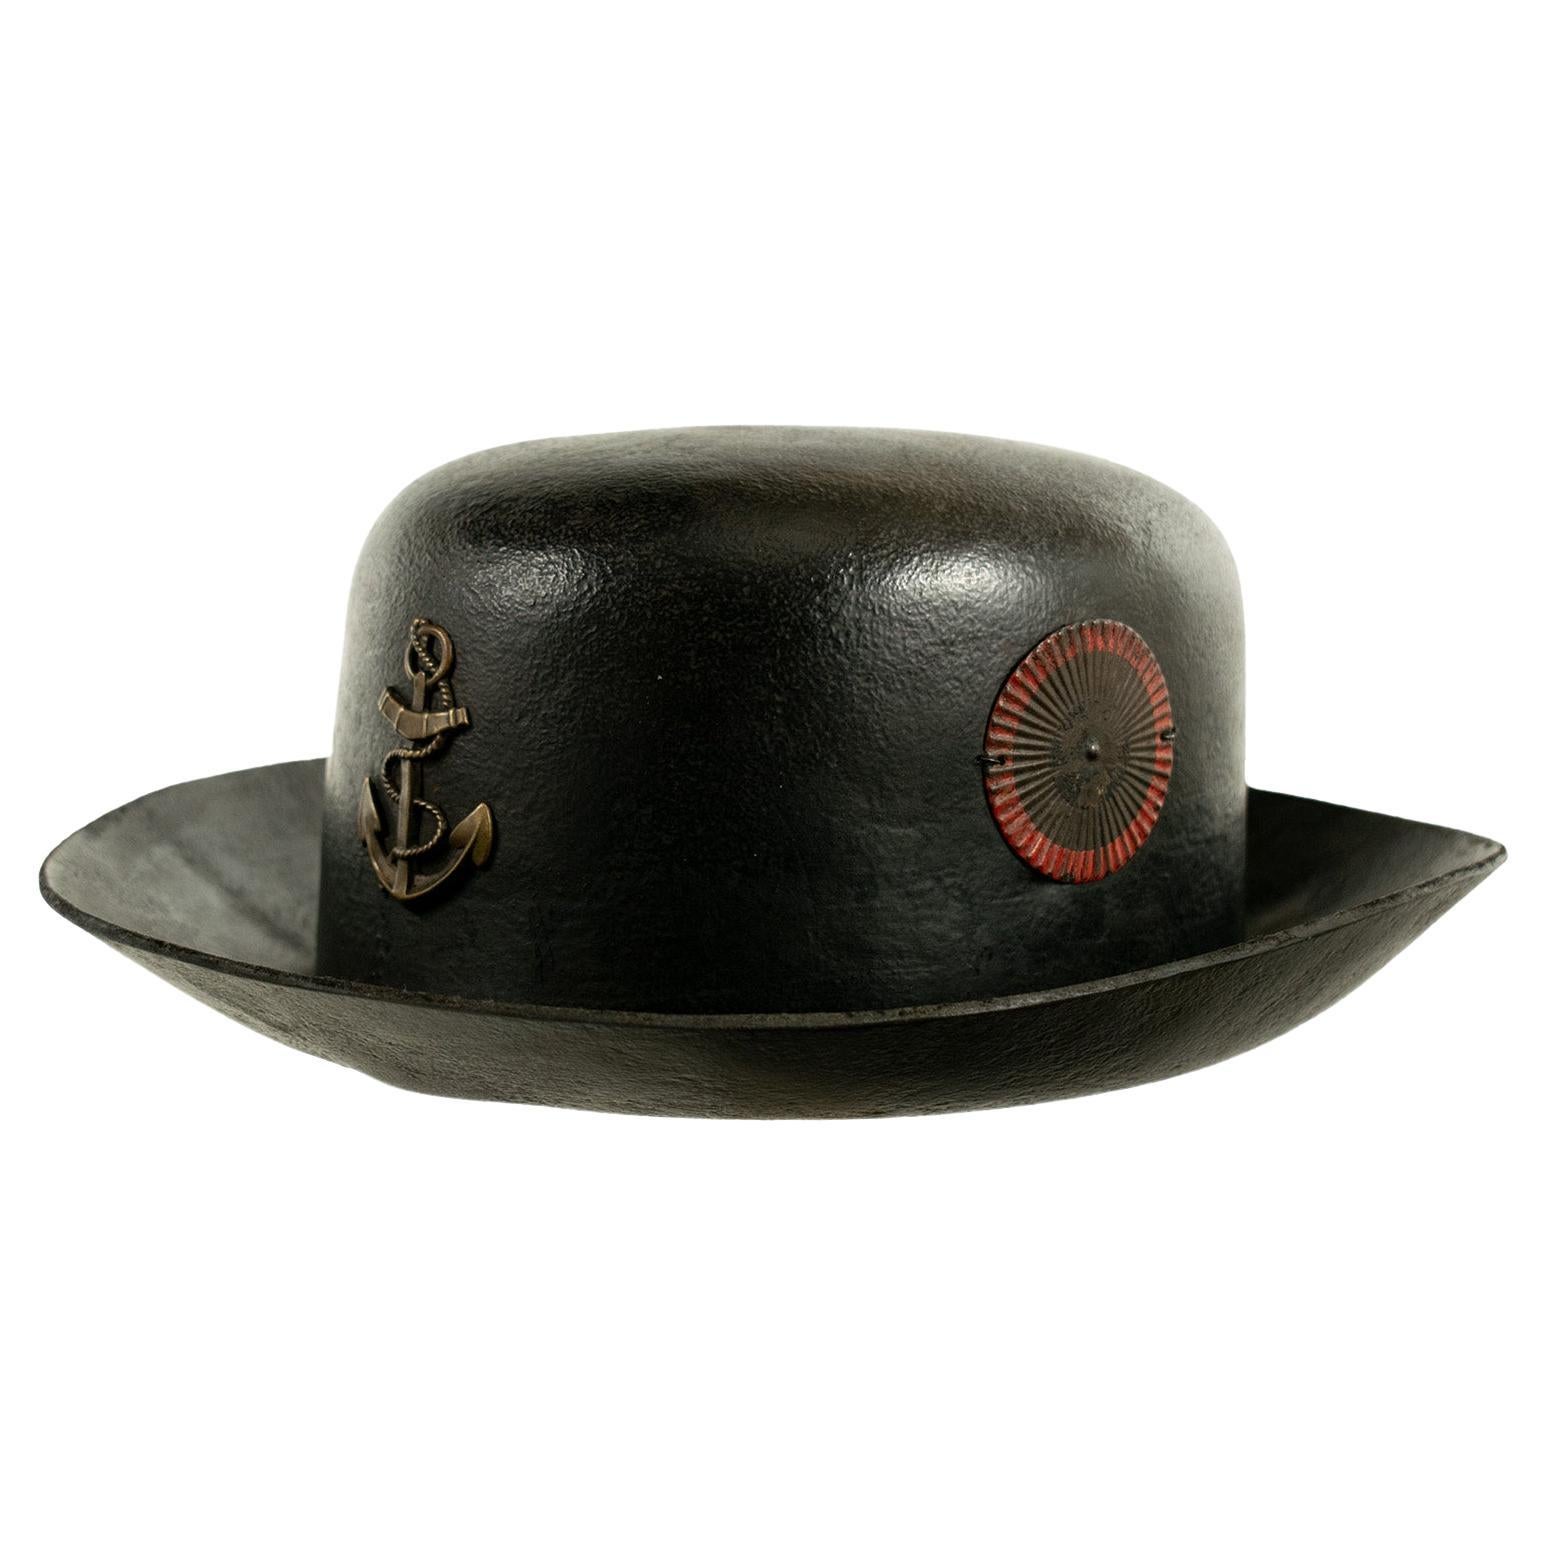 RARE FRENCH SEAMAN'S TAR HAT - early 19th century. For Sale